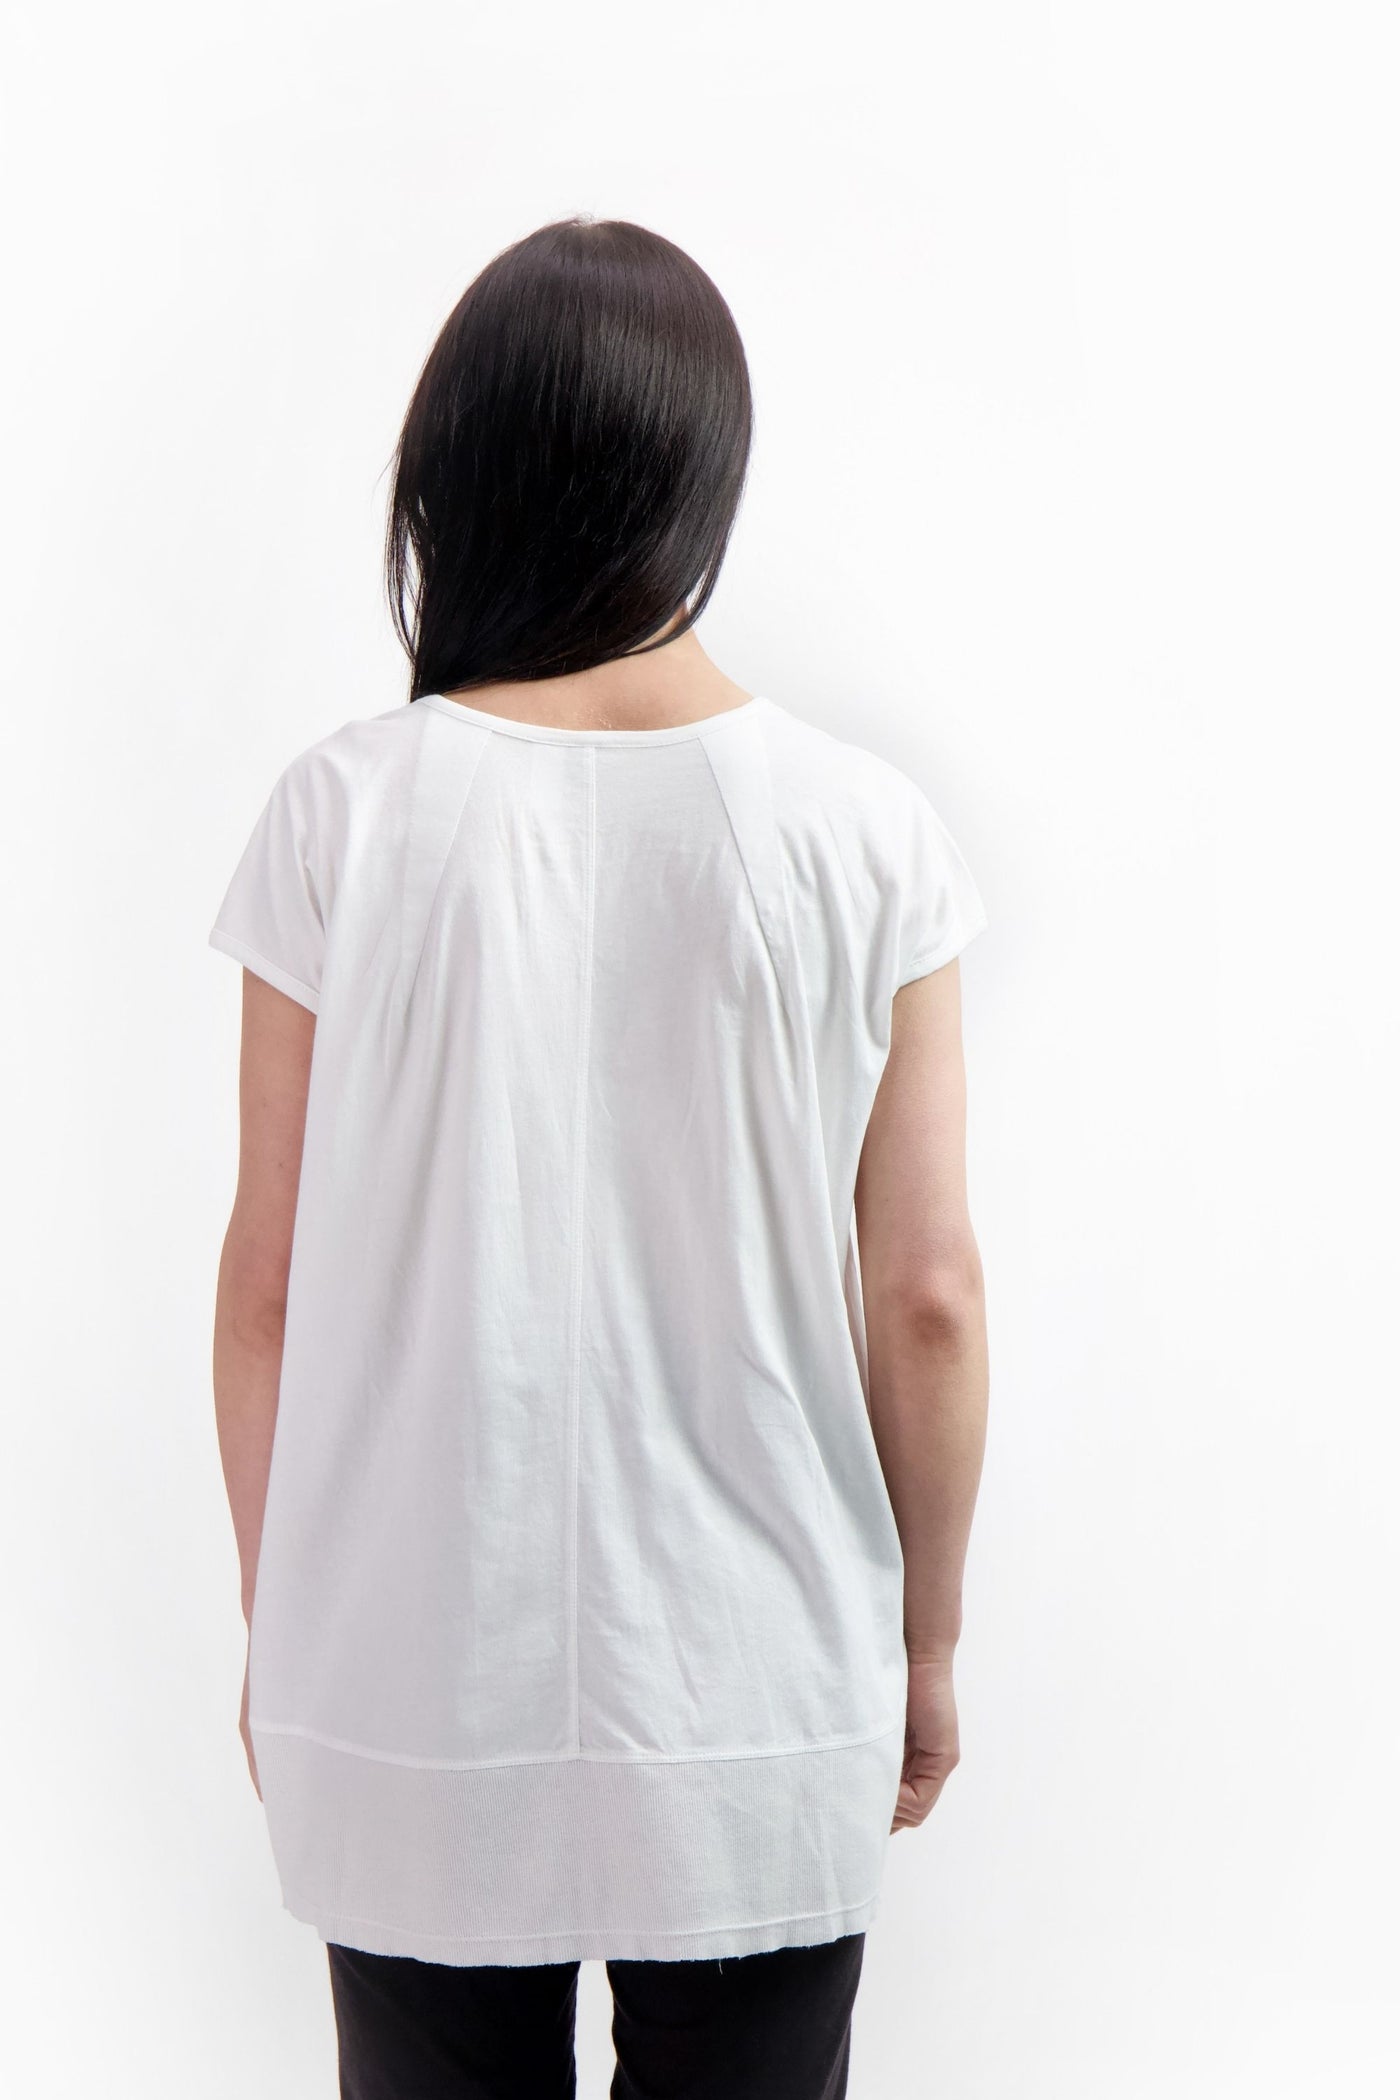 White cotton sustainable t shirt